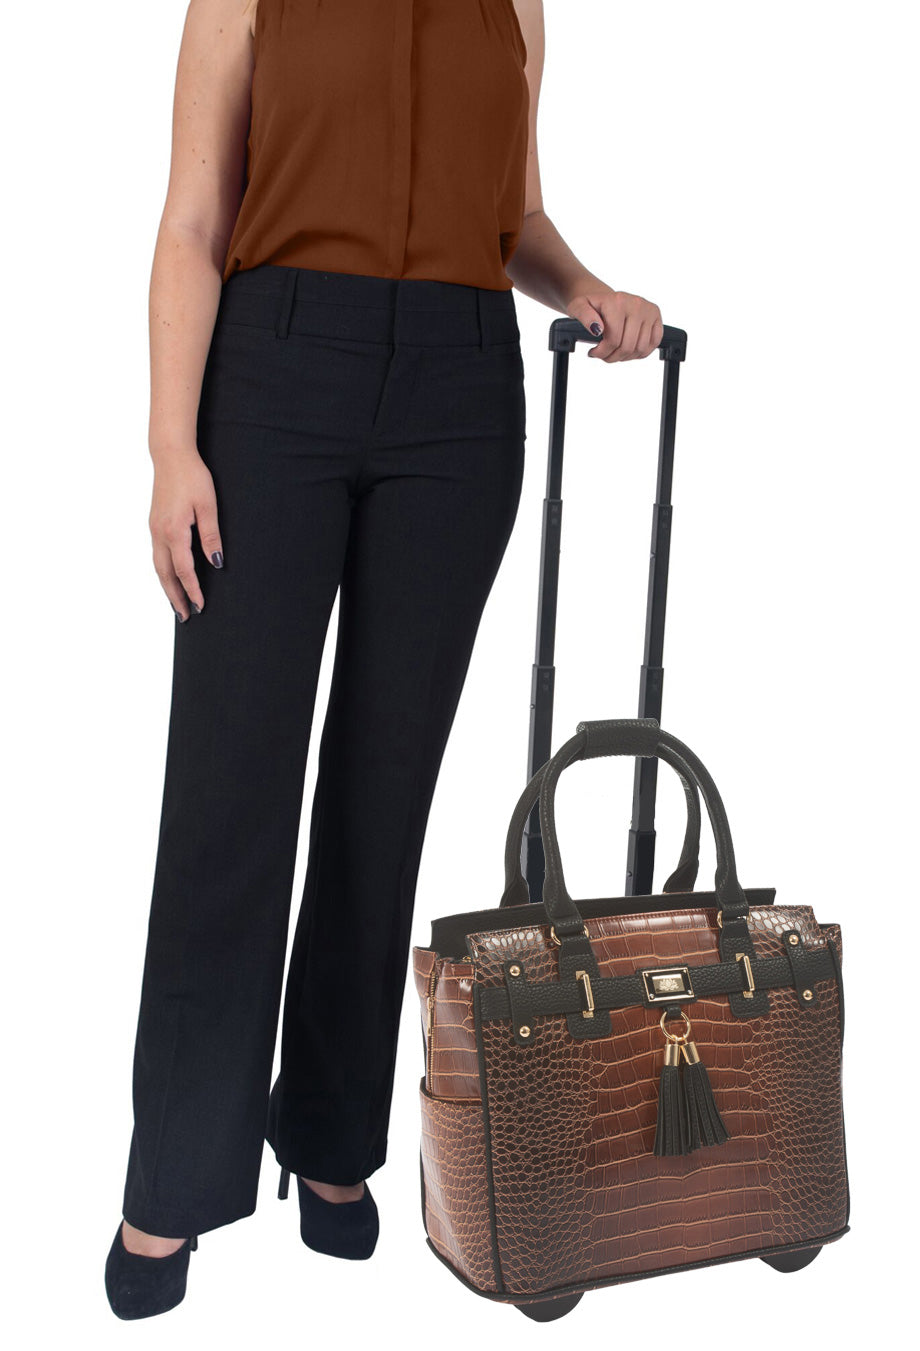 Manhattan Alligator Rolling Laptop Bag - Stylish Briefcase & Tote for  Professional Women or Teacher - Fits 15.6-17 Laptop